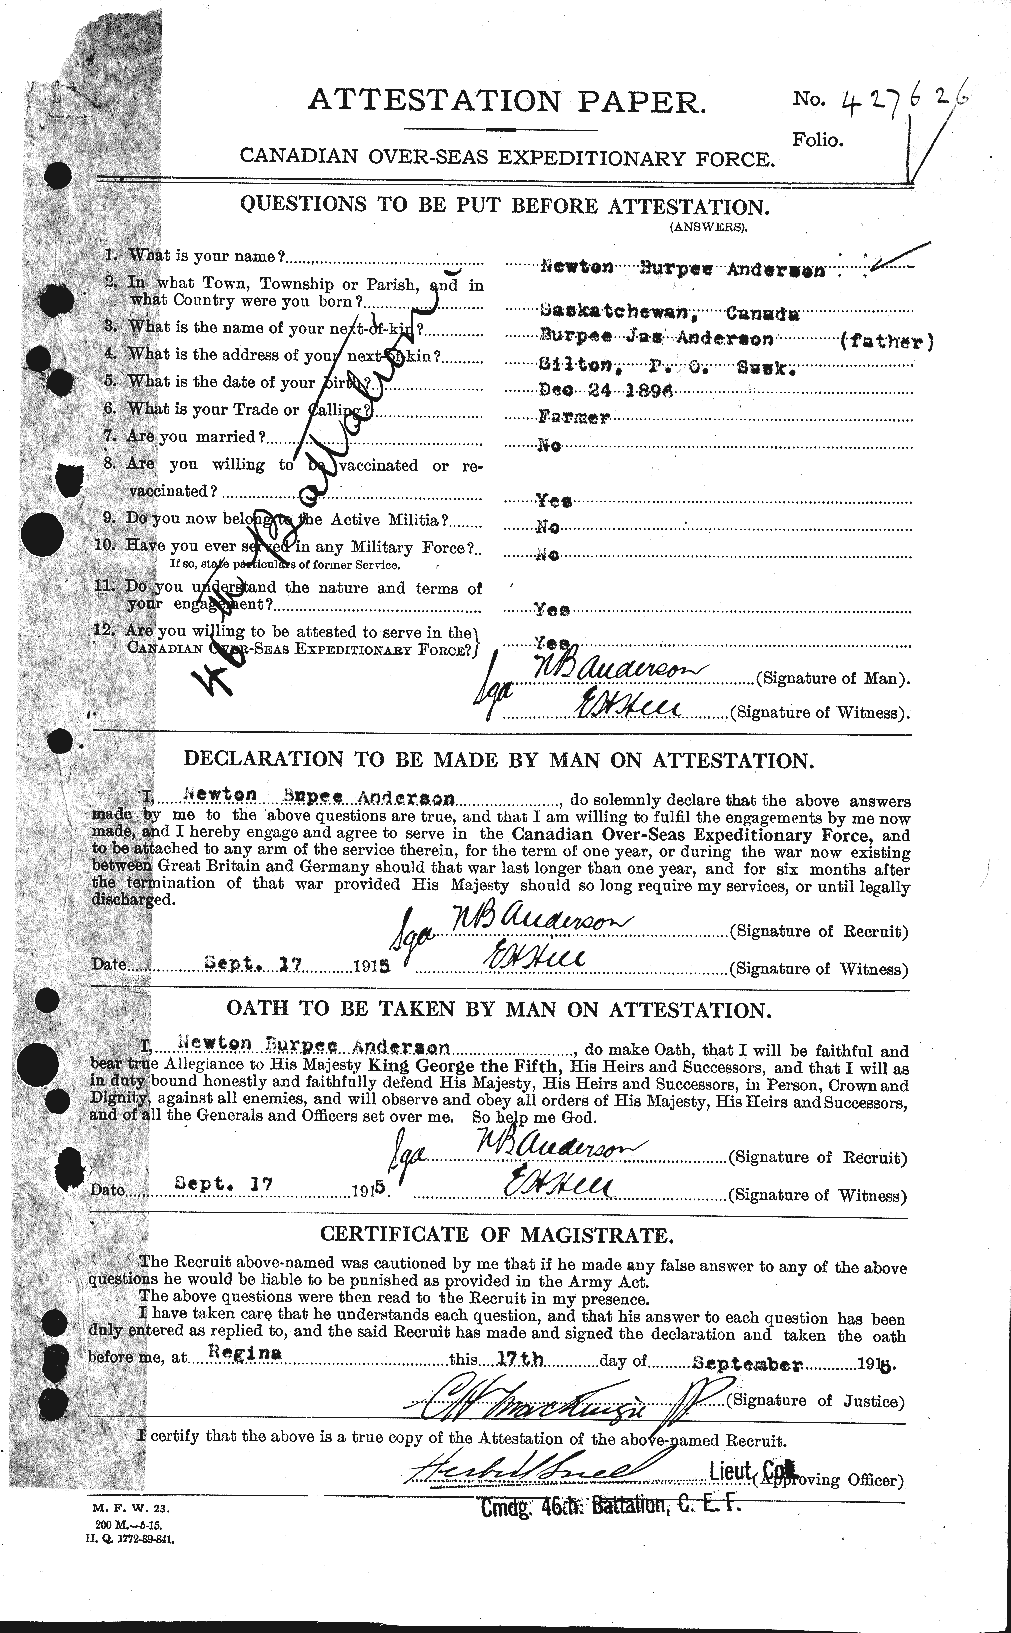 Personnel Records of the First World War - CEF 207423a